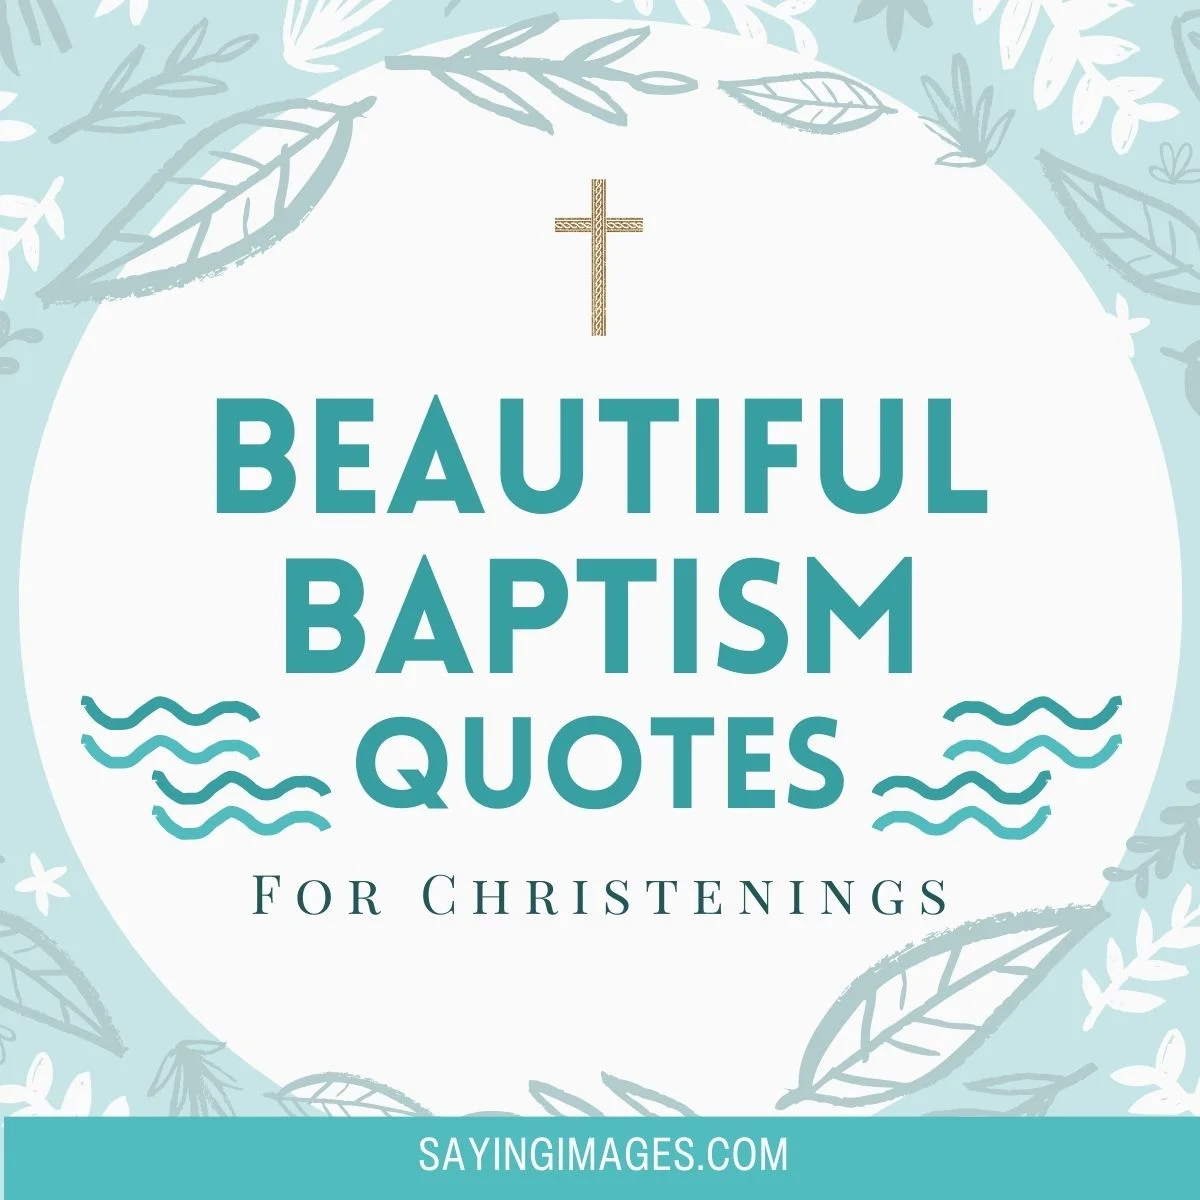 Beautiful Baptism Quotes For Christenings